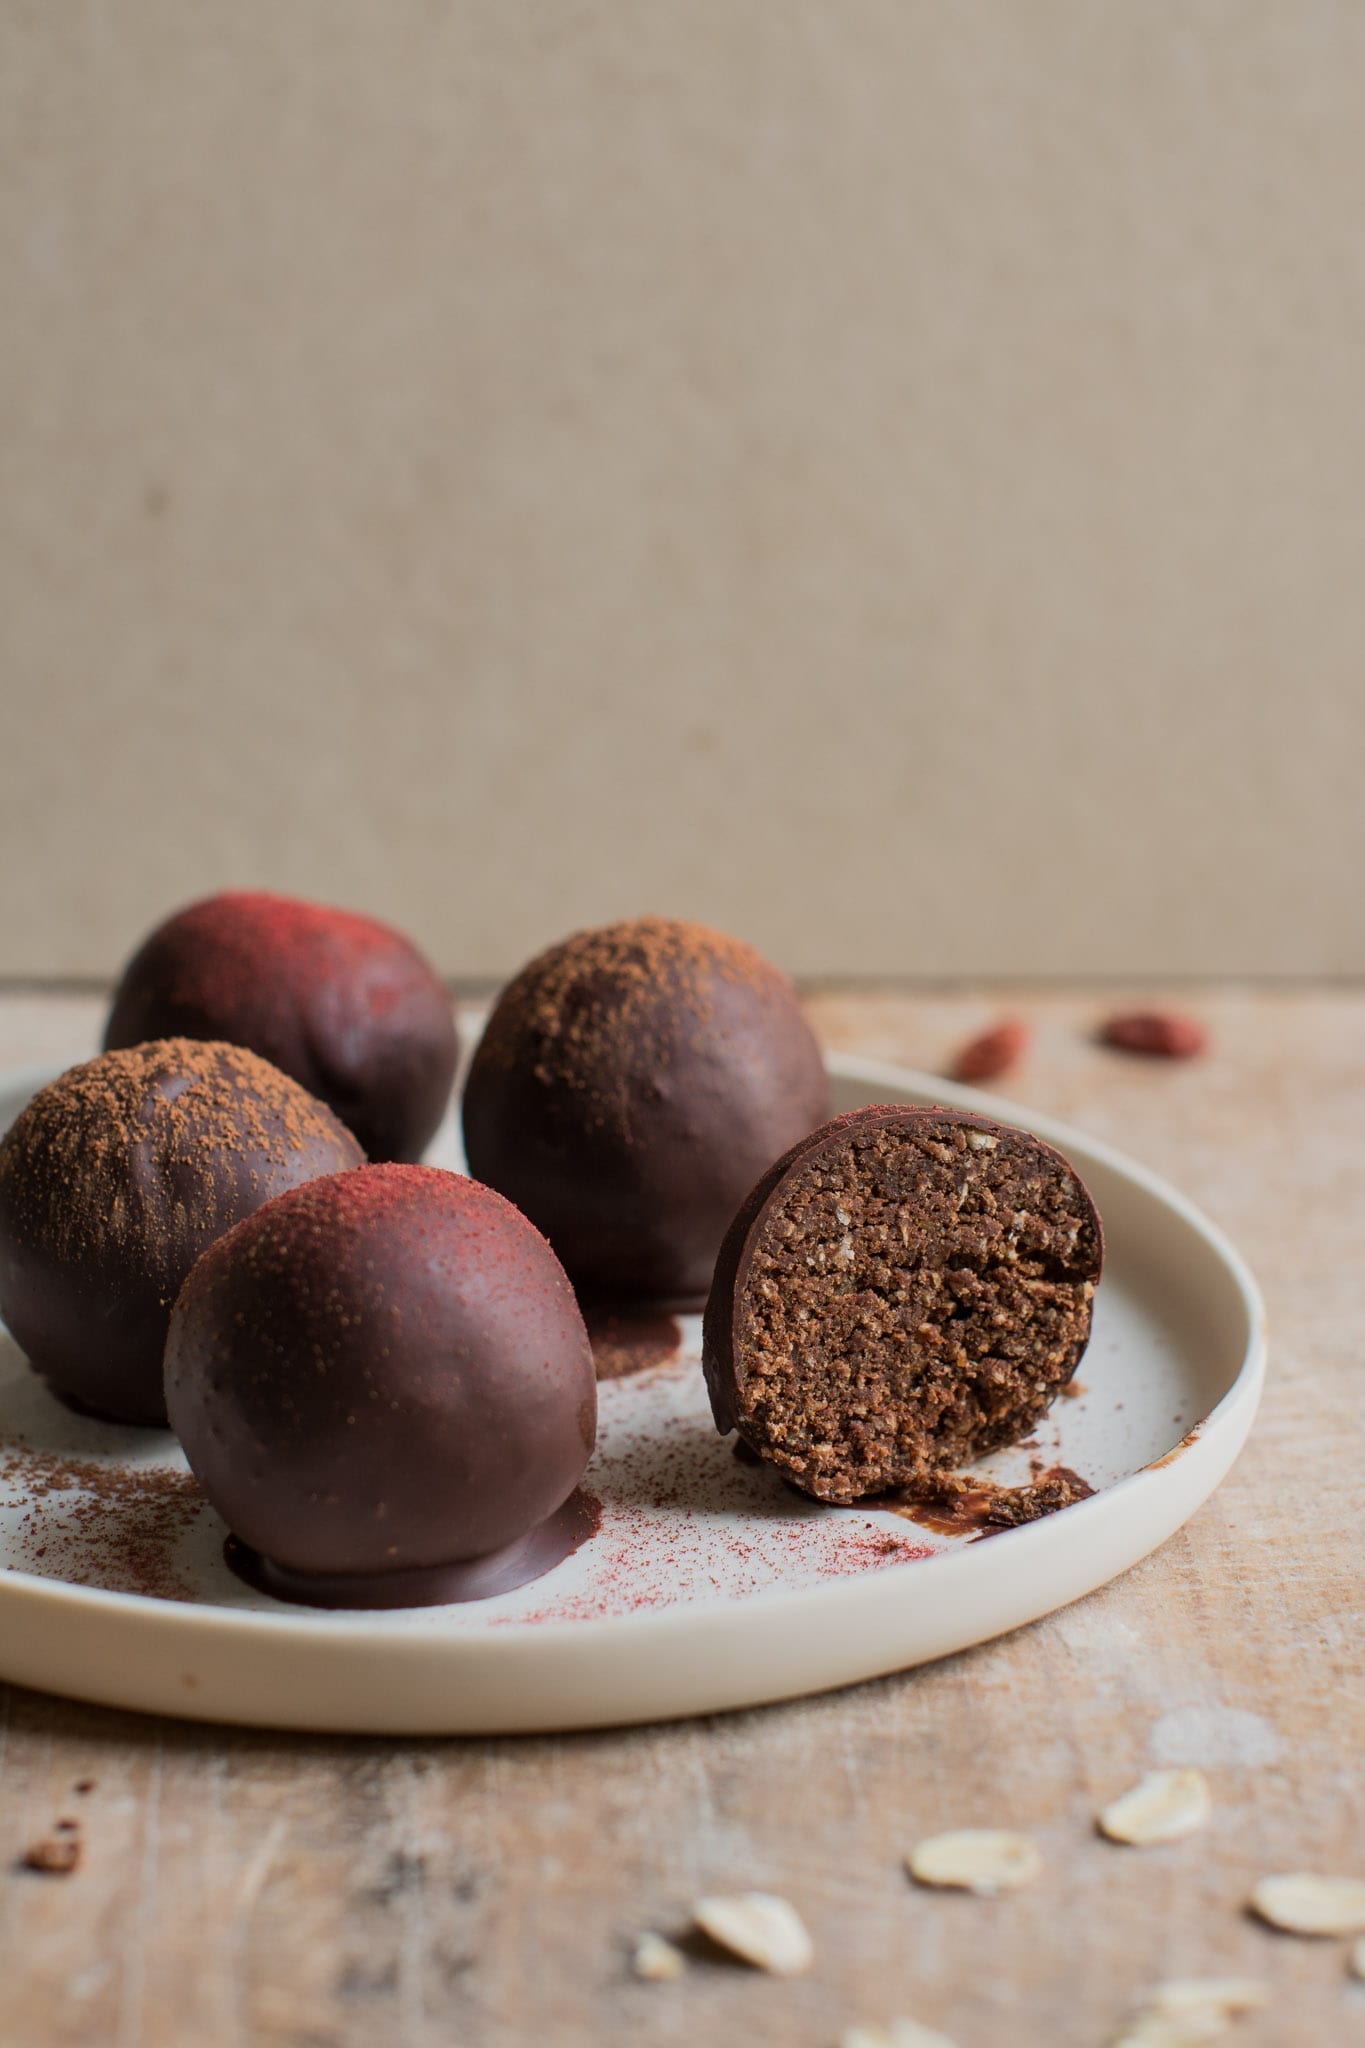 Quick and easy gingerbread flavoured vegan energy balls that are perfect as healthy snacks when you need a pick-me-up in the afternoon. You only need a food processor or a large bowl, a spoon and 25 minutes of your time.